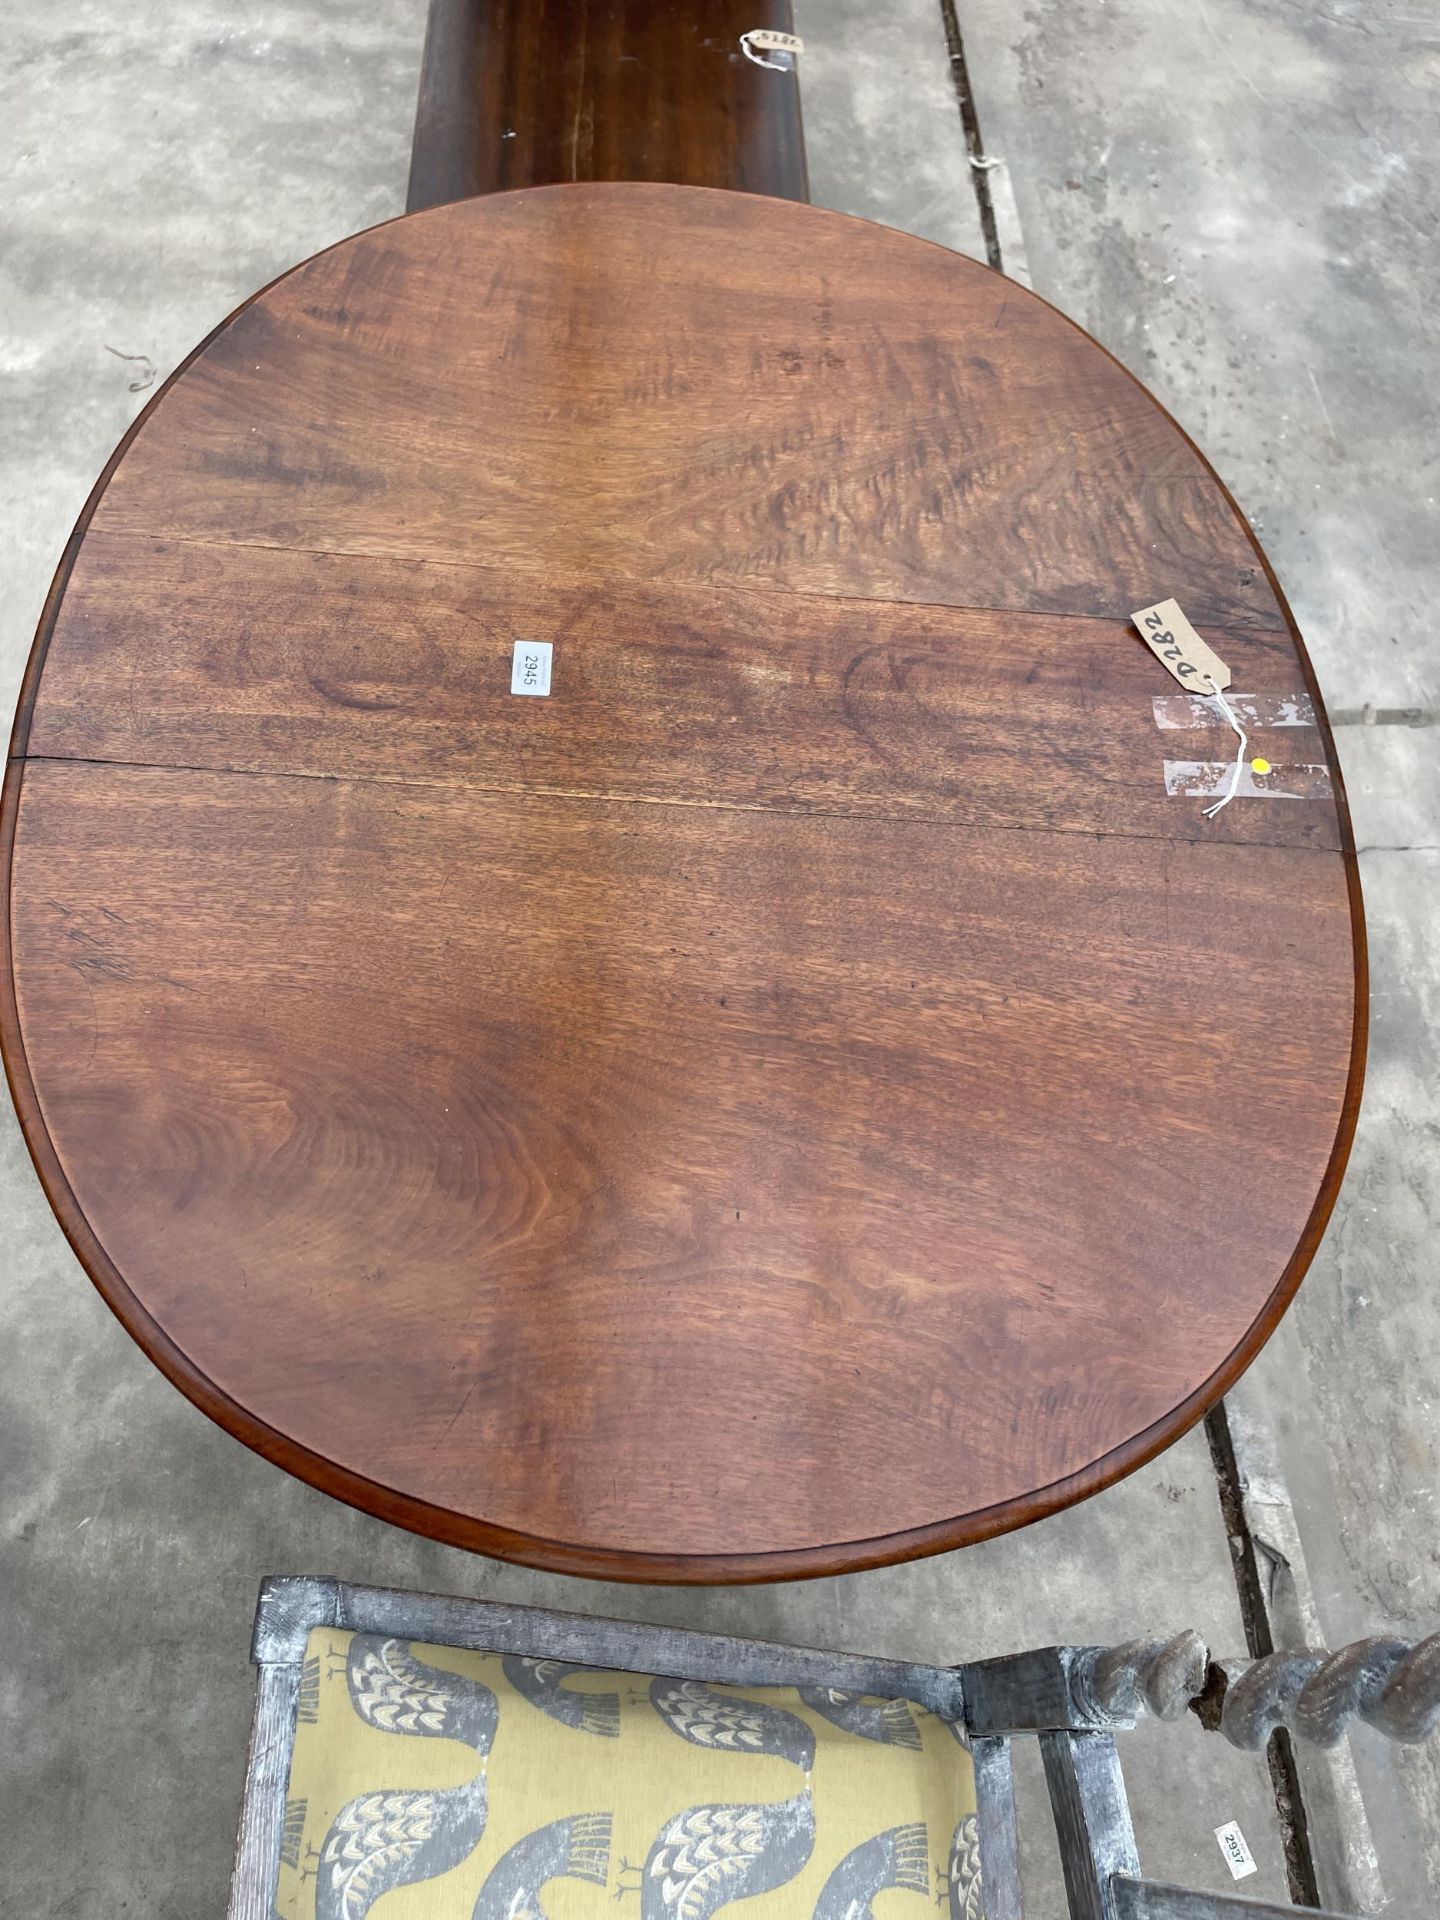 A VICTORIAN MAHOGANY OVAL SUTHERLAND TABLE 37" X 30" OPENED - Image 3 of 3